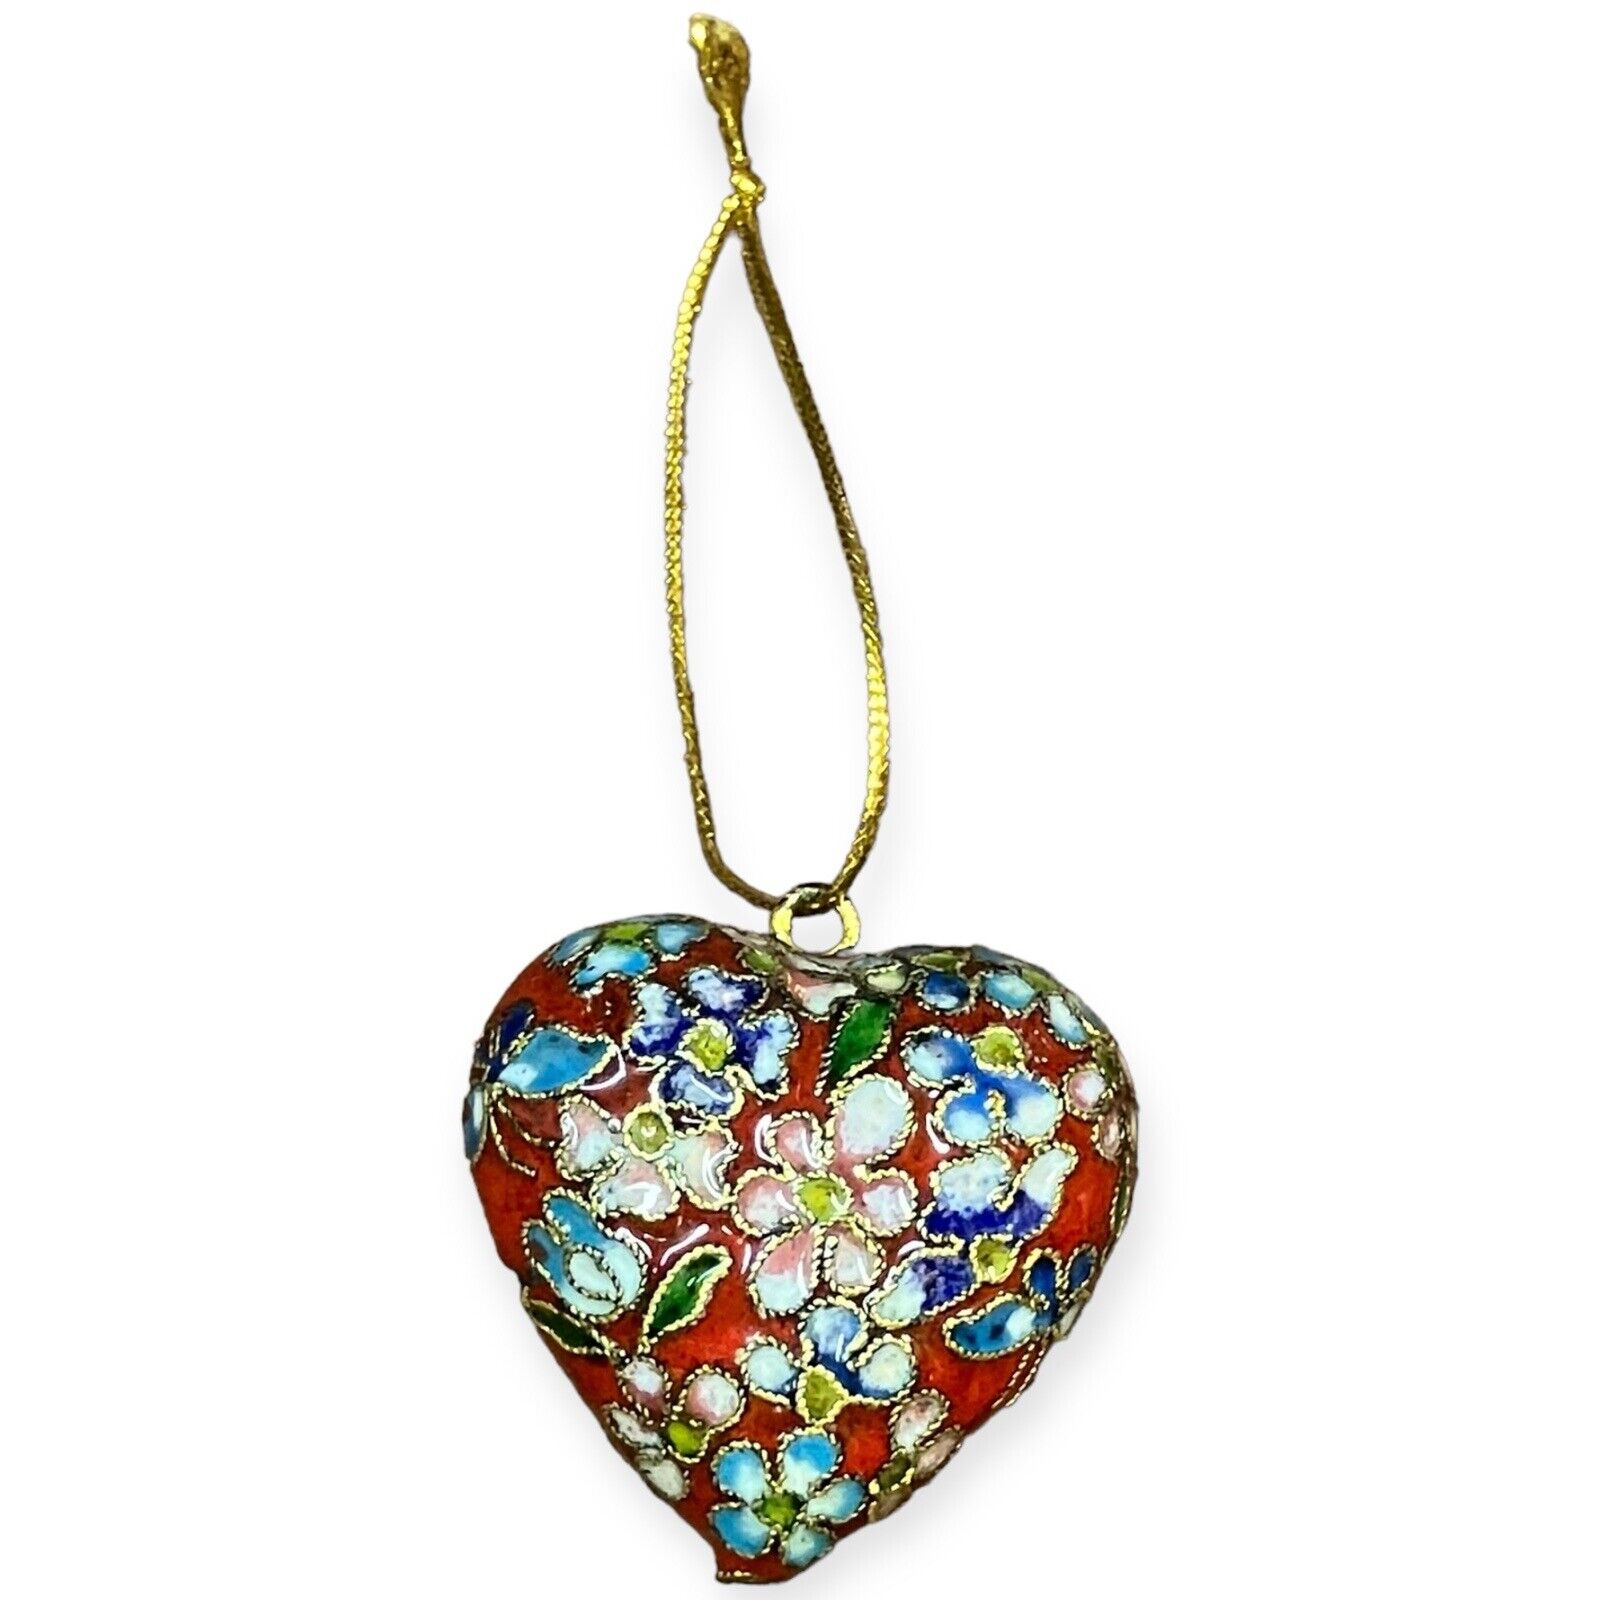 CLOISONNE Red Pink Blue Green Heart Shaped Floral Flowers Christmas Ornament